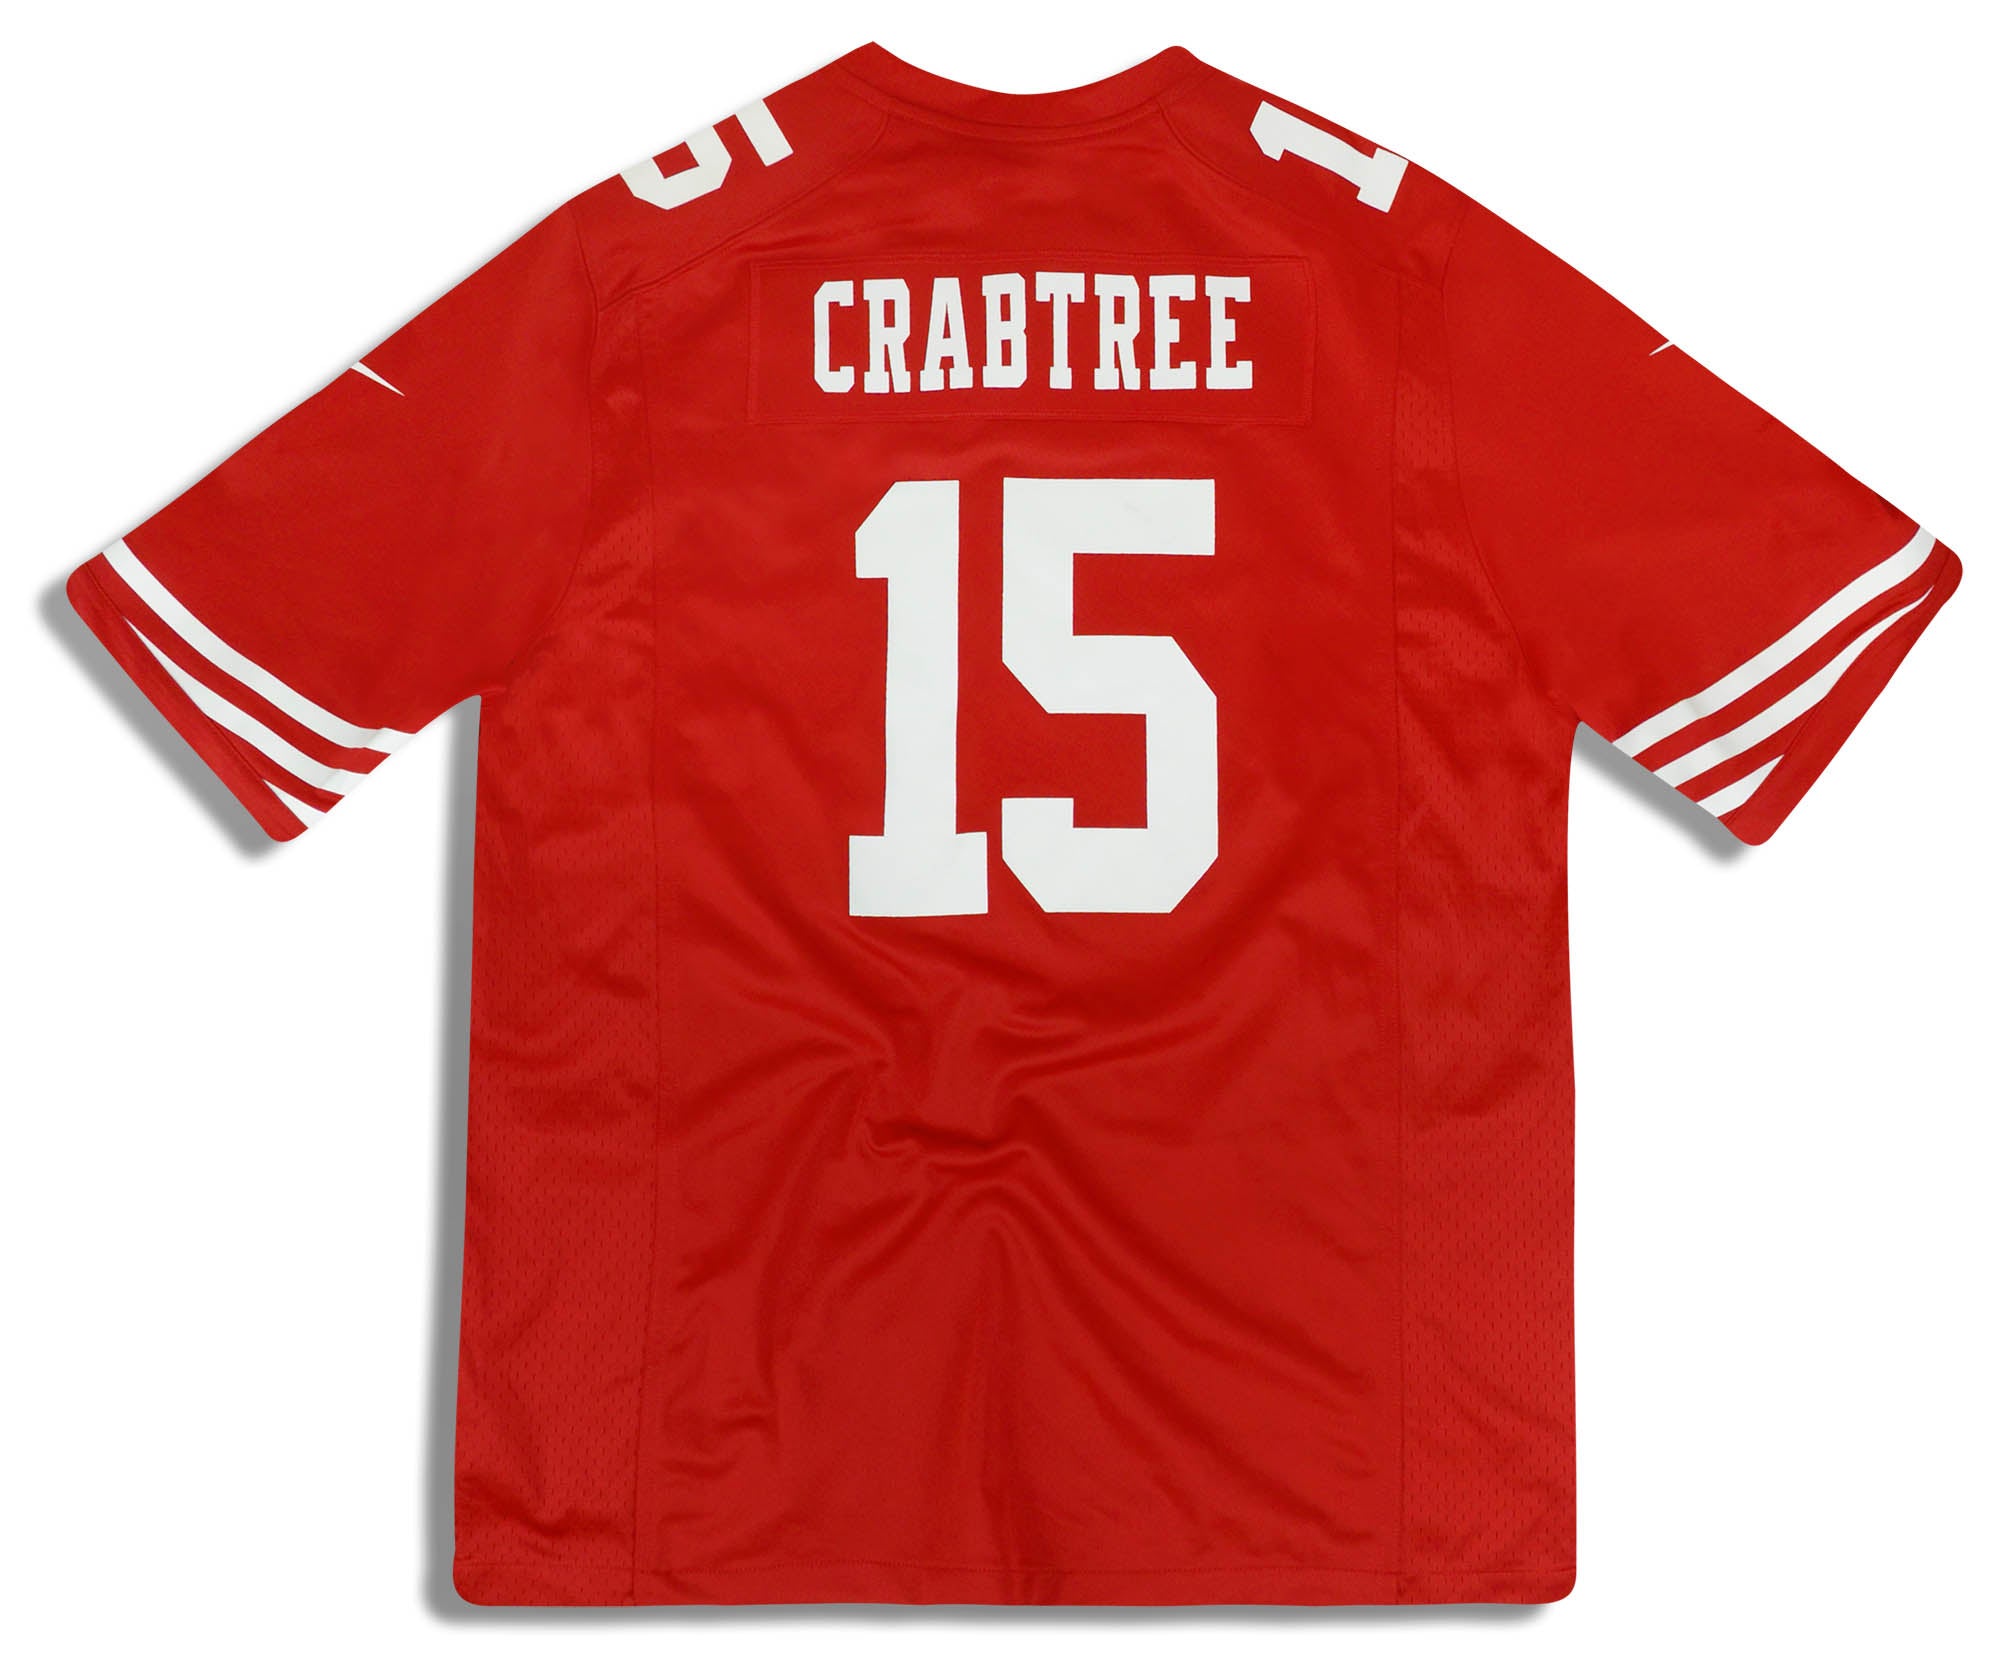 2012-14 SAN FRANCISCO 49ERS CRABTREE #15 NIKE GAME JERSEY (HOME) XL